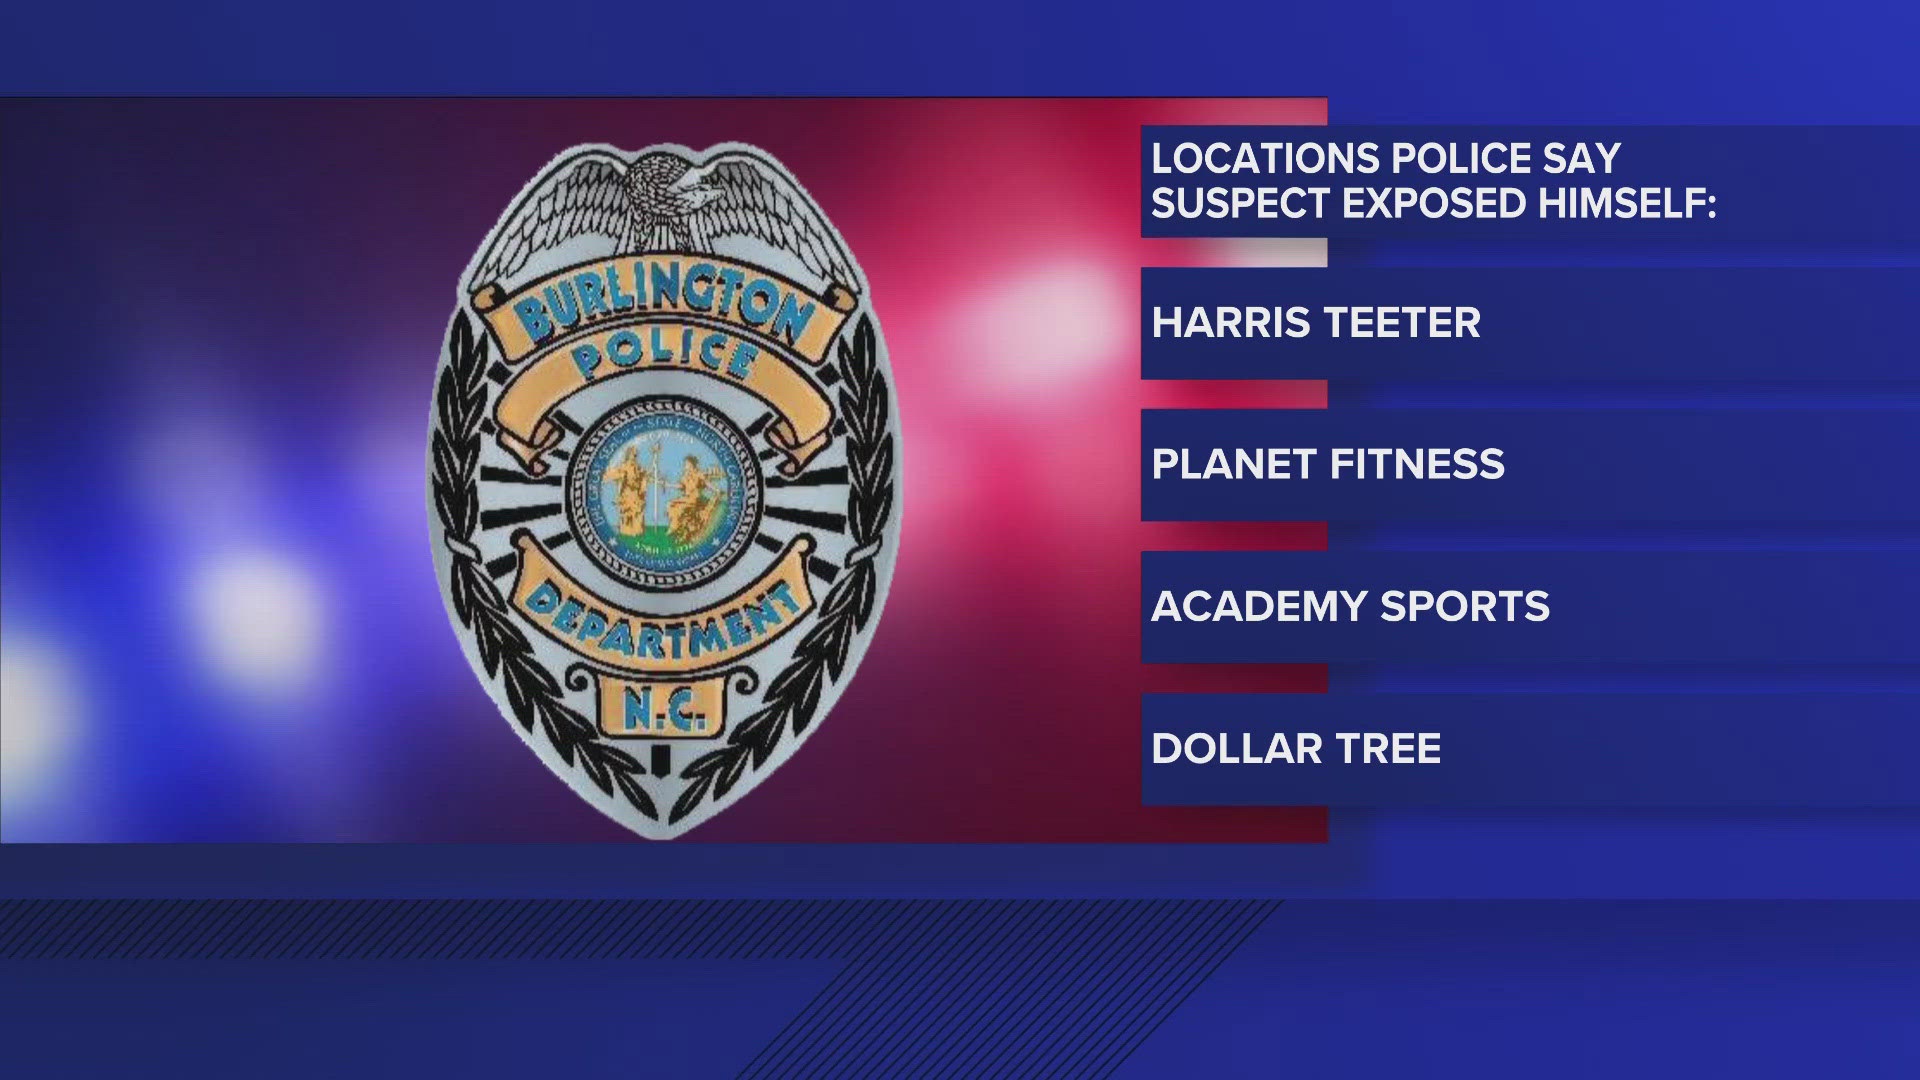 Police say he was at Harris Teeter, Academy Sports, Planet Fitness and Dollar Tree.